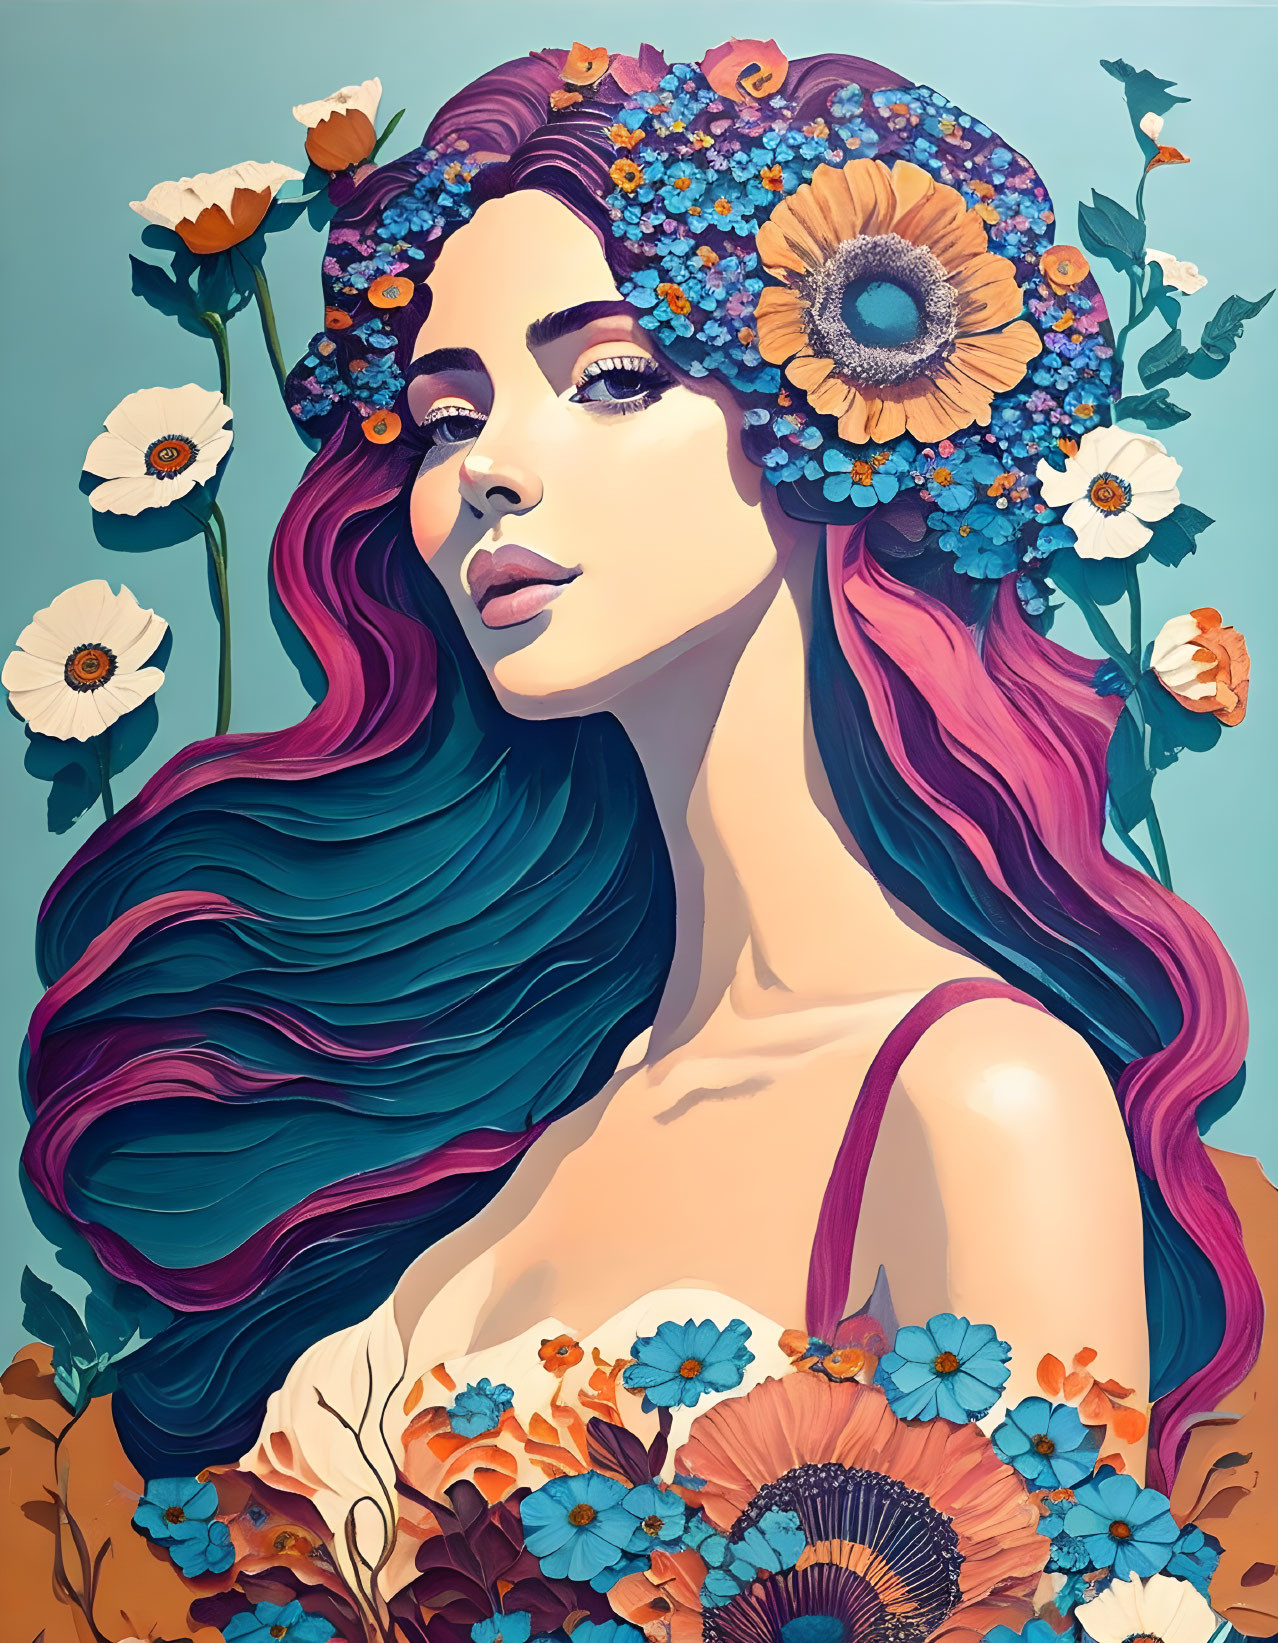 Vibrant digital illustration: Woman with pink hair and floral wreath on teal background